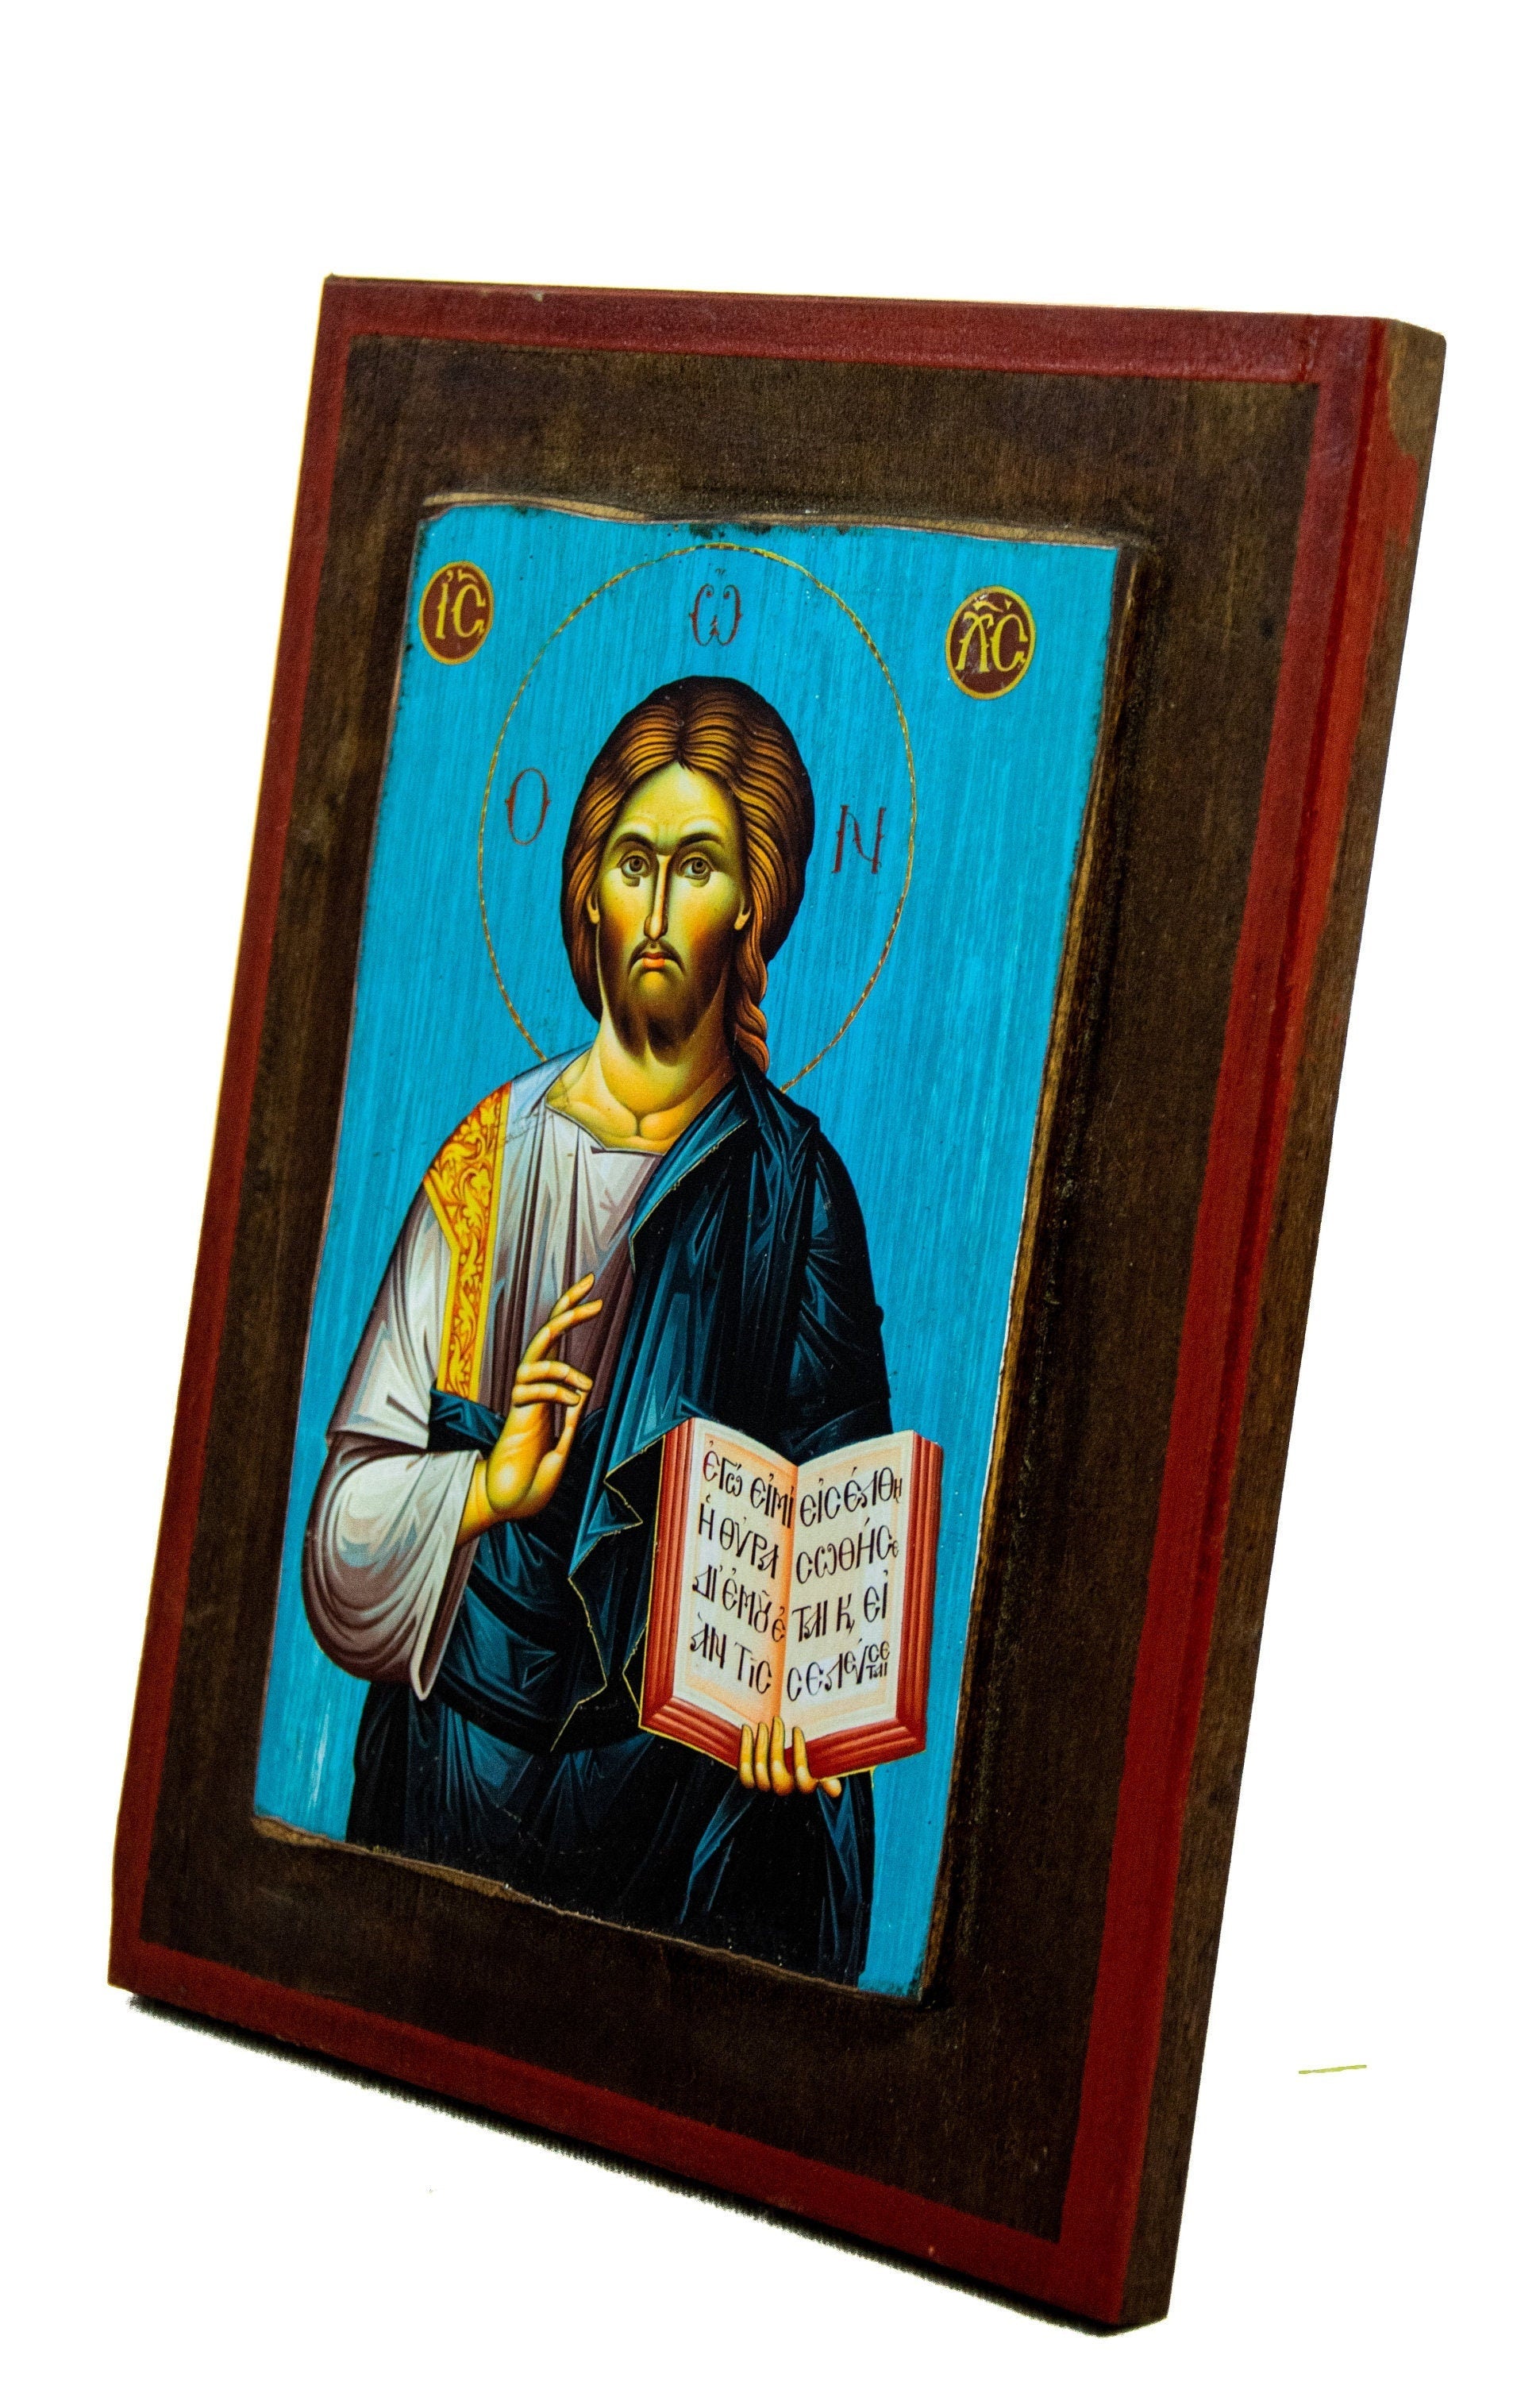 Jesus Christ icon, Handmade Greek Orthodox icon, Byzantine art wall hanging of our Lord on wood plaque, religious decor TheHolyArt